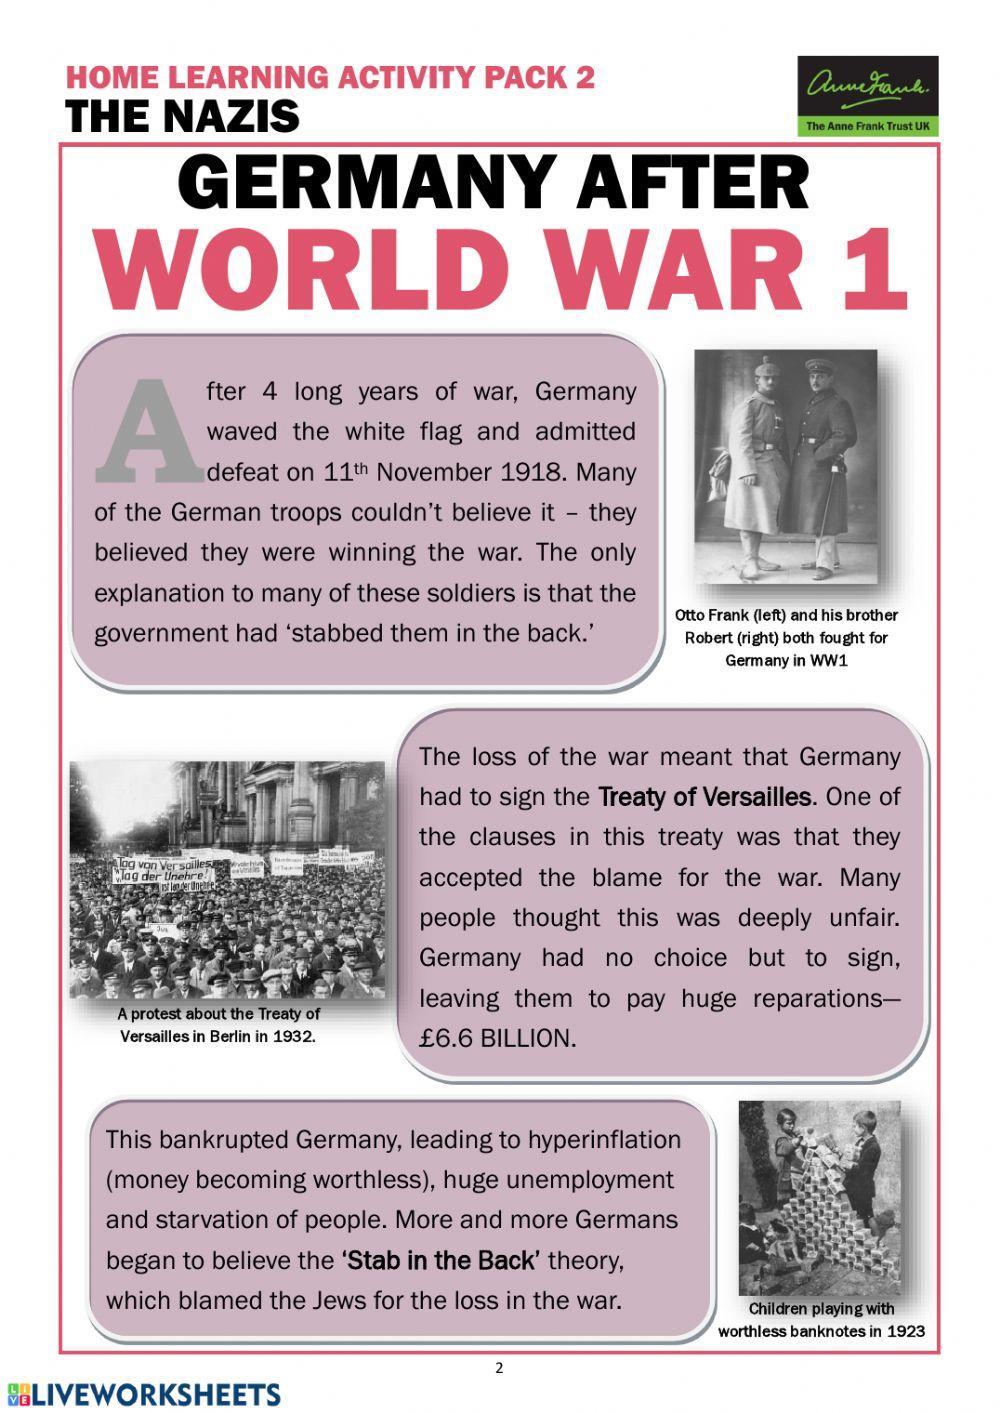 Home Learning Activity Pack 2 - THE NAZIS